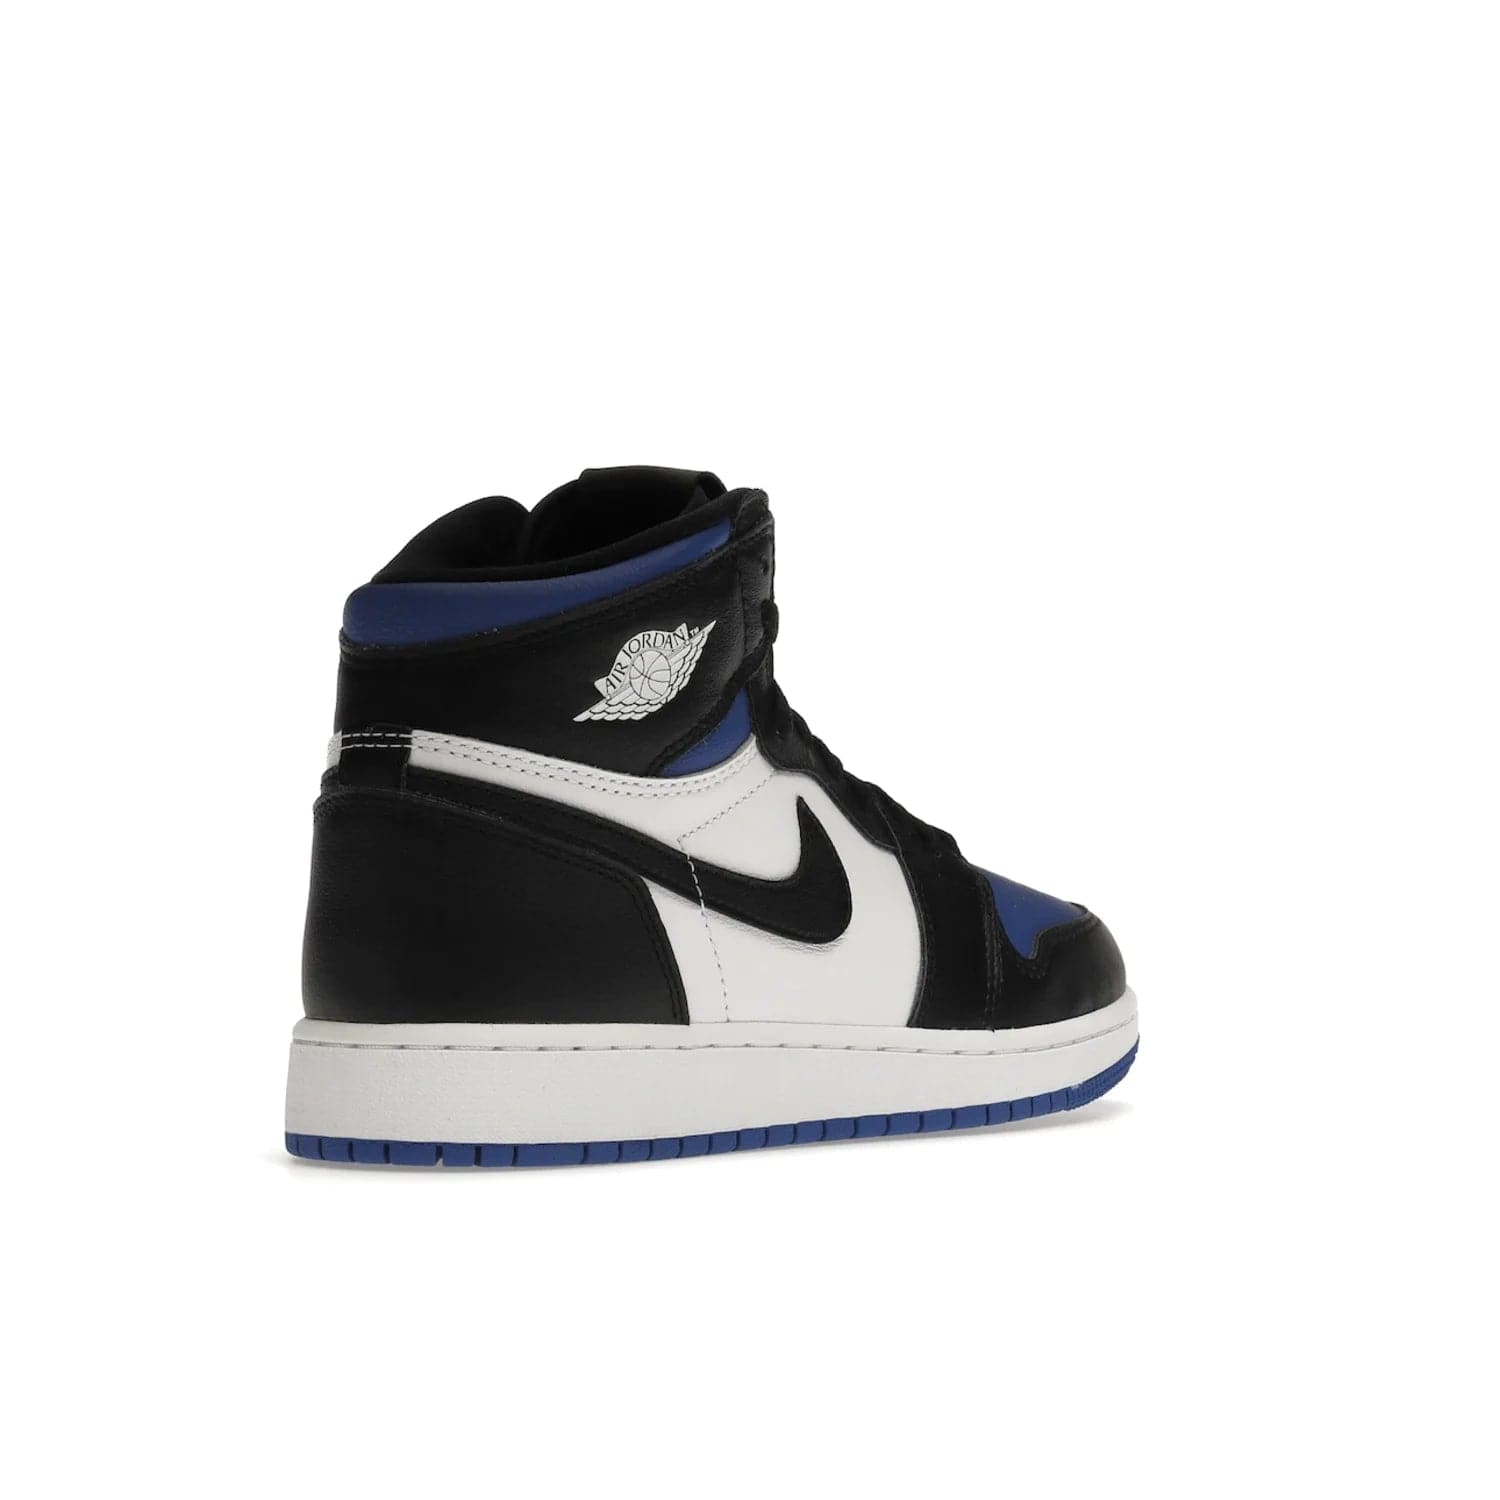 Jordan 1 Retro High Royal Toe (GS) - Image 32 - Only at www.BallersClubKickz.com - Take your sneaker wardrobe to the next level with the Jordan 1 Retro High Royal Toe (GS). Combining classic design with a luxurious white and royal blue leather upper, a textured black Swoosh and a tapered outsole. Stand out with the Air Jordan Wings logo near the heel.